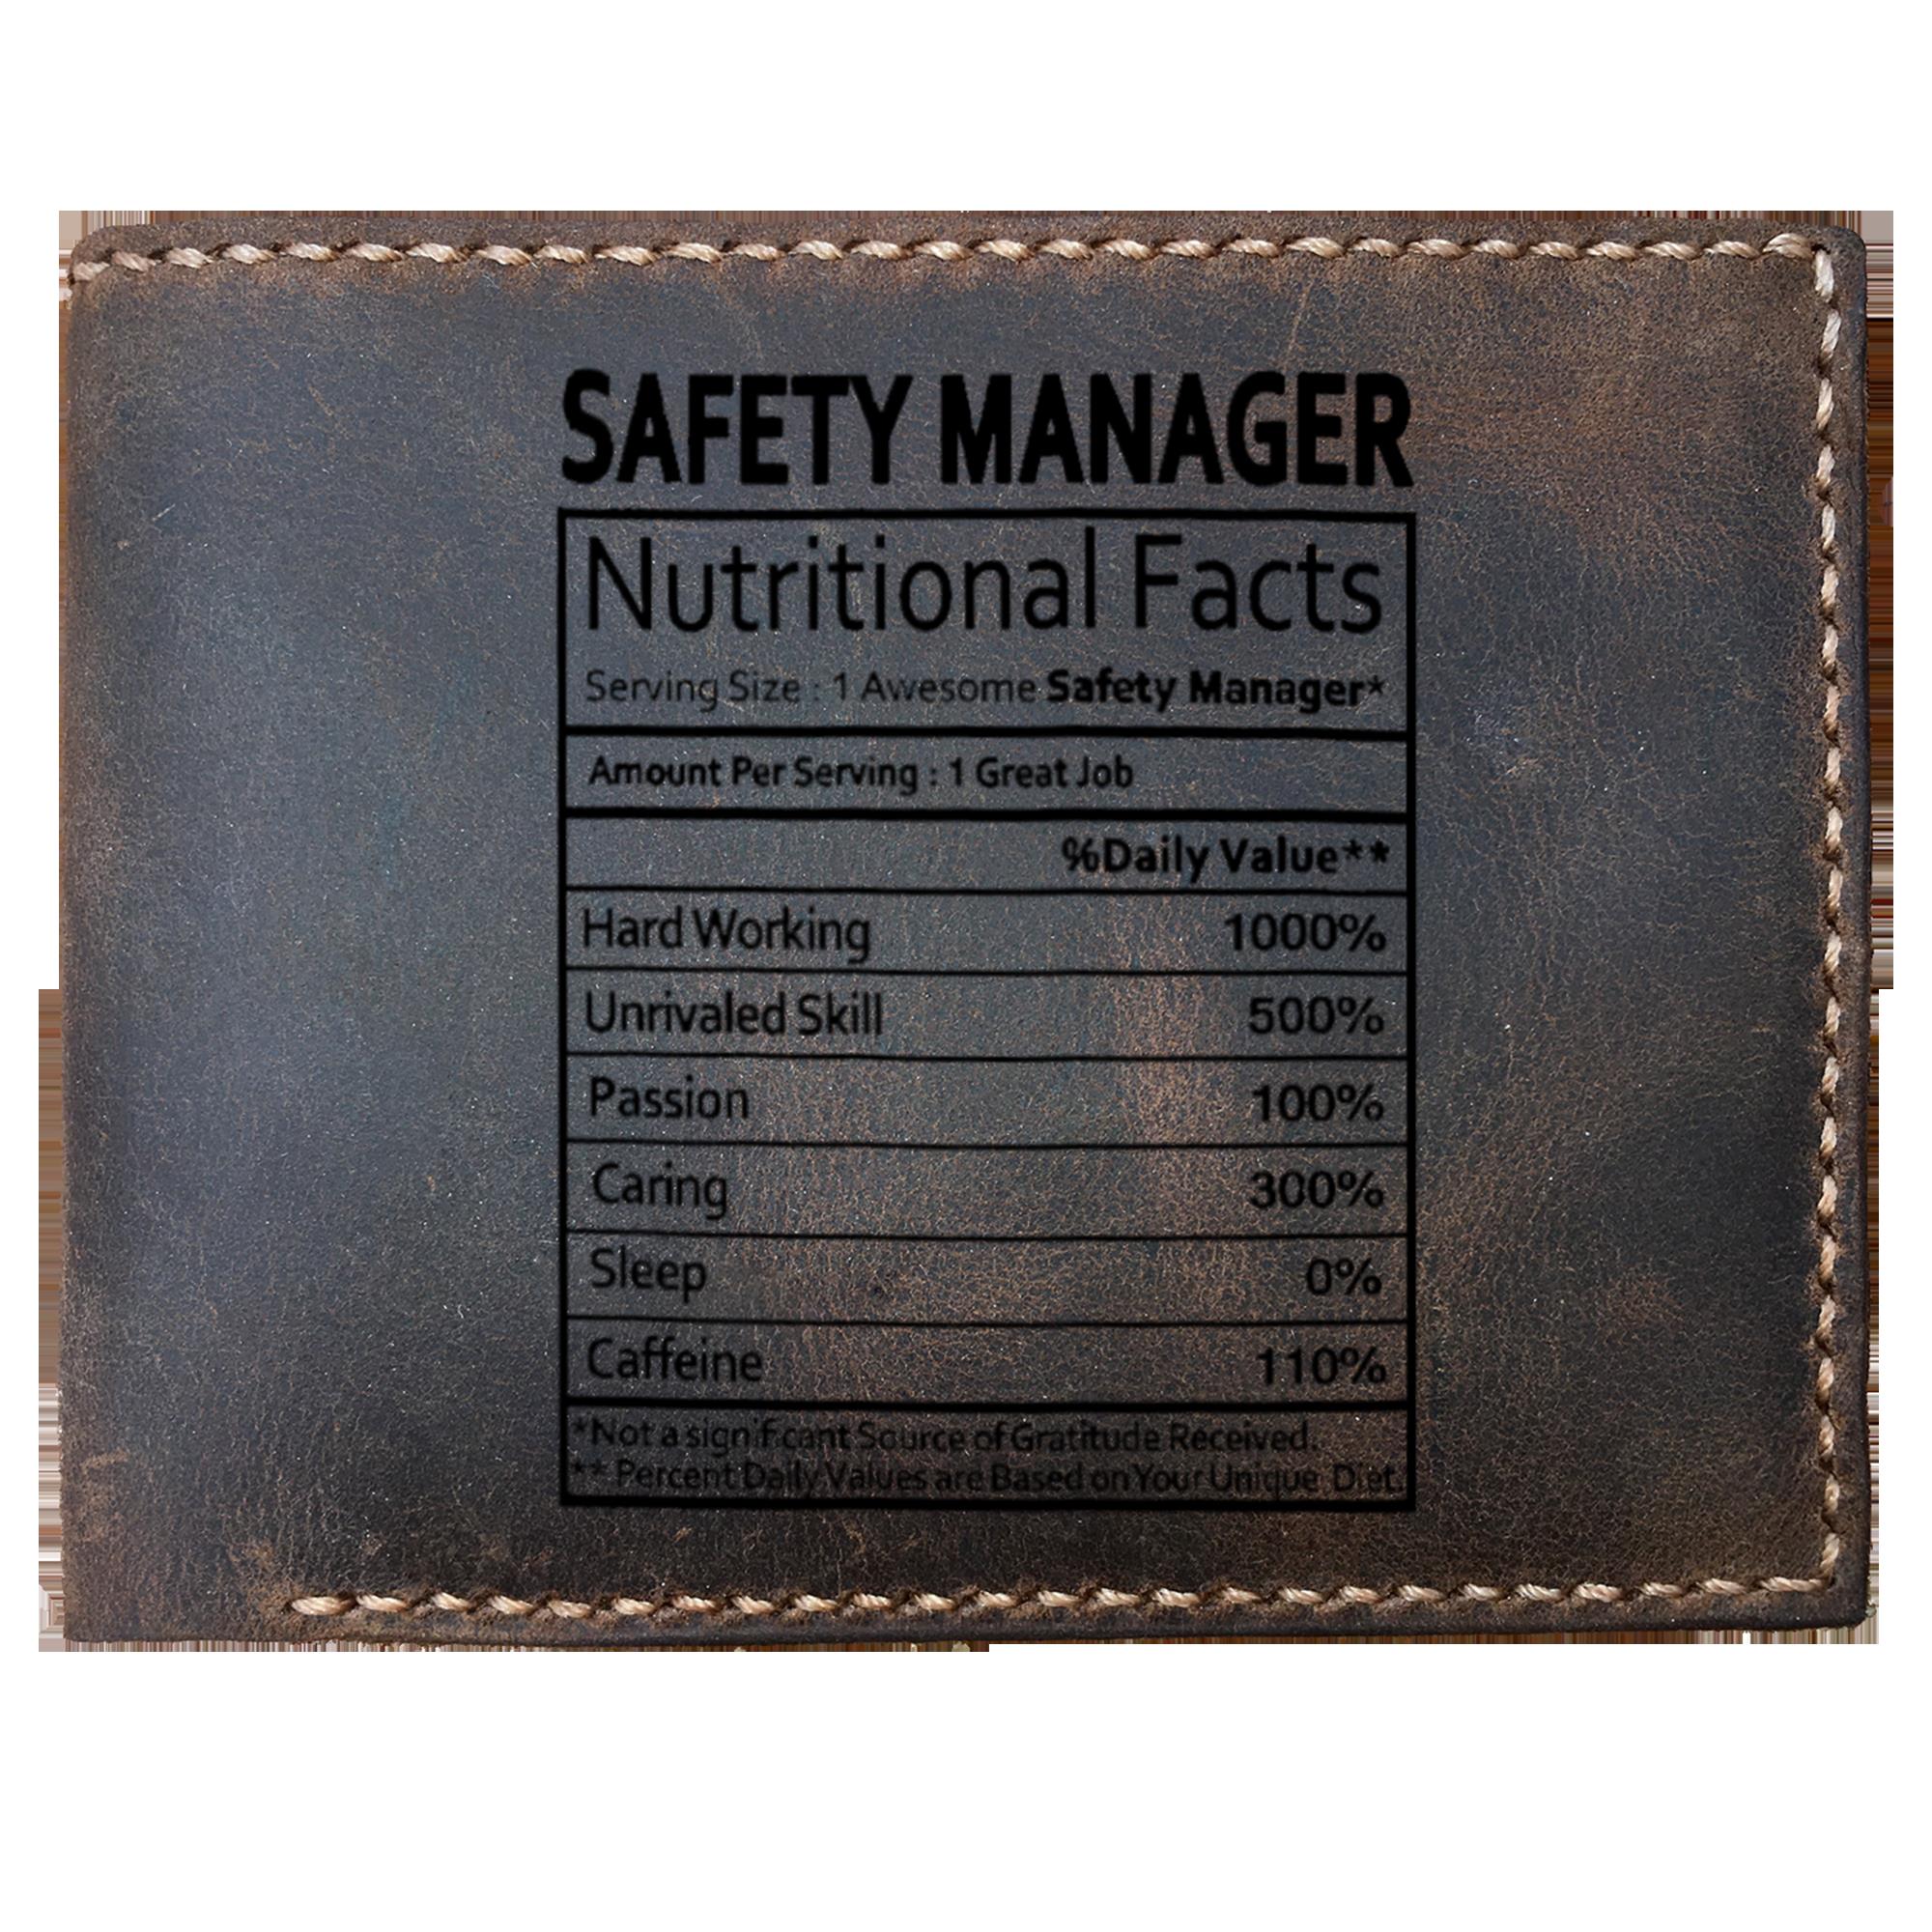 Skitongifts Funny Custom Laser Engraved Bifold Leather Wallet For Men, Safety Manager Nutritional Facts